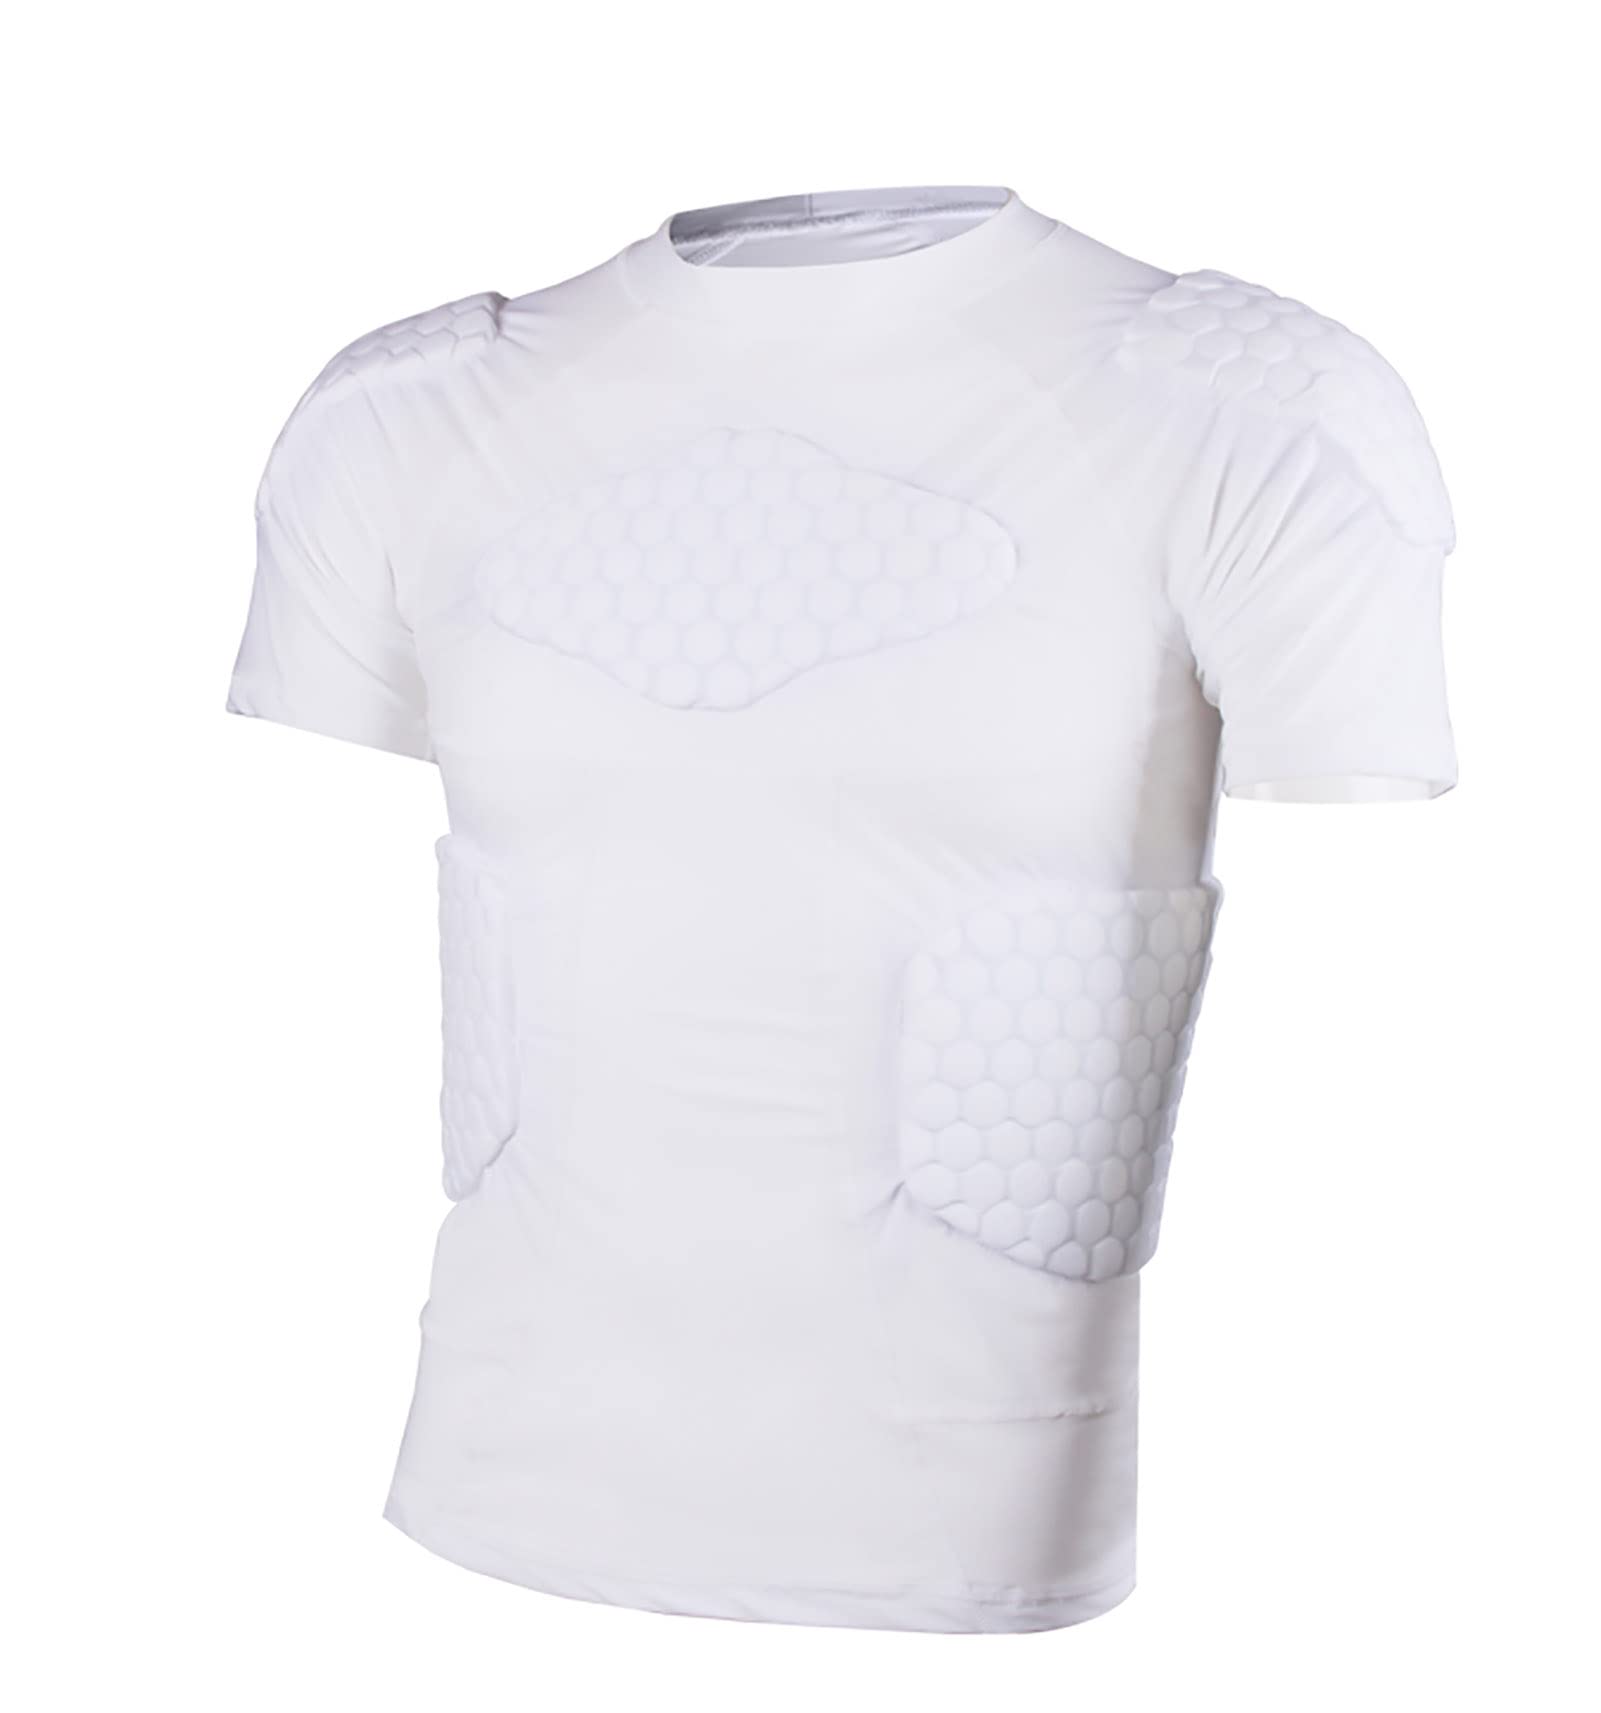 Jellybro Mens Padded Compression Shirt Womens White Protective